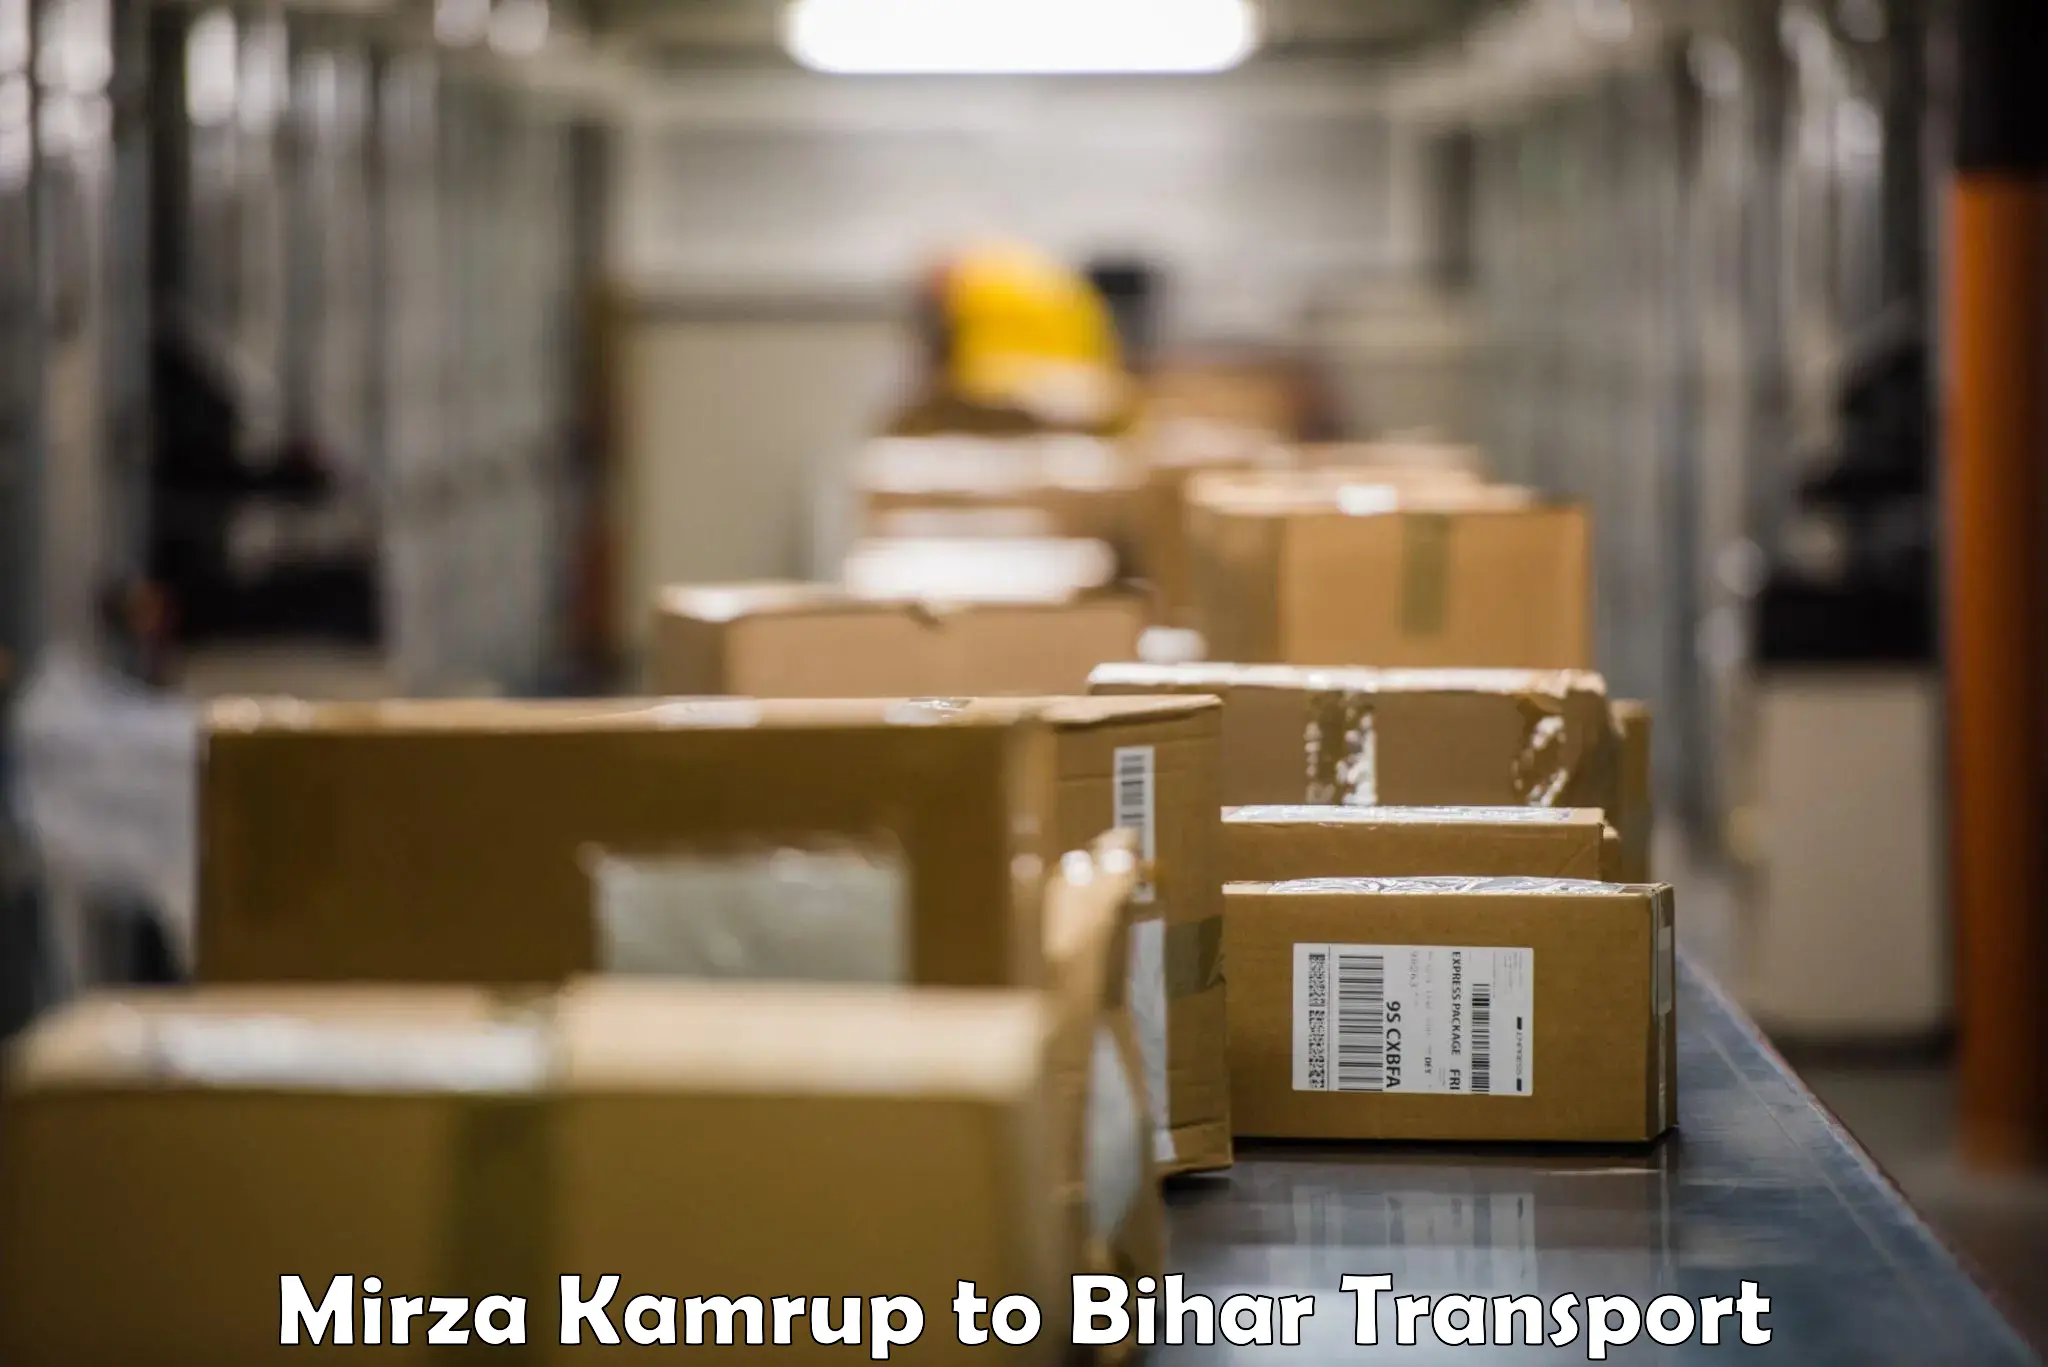 Goods delivery service Mirza Kamrup to Bakhtiarpur